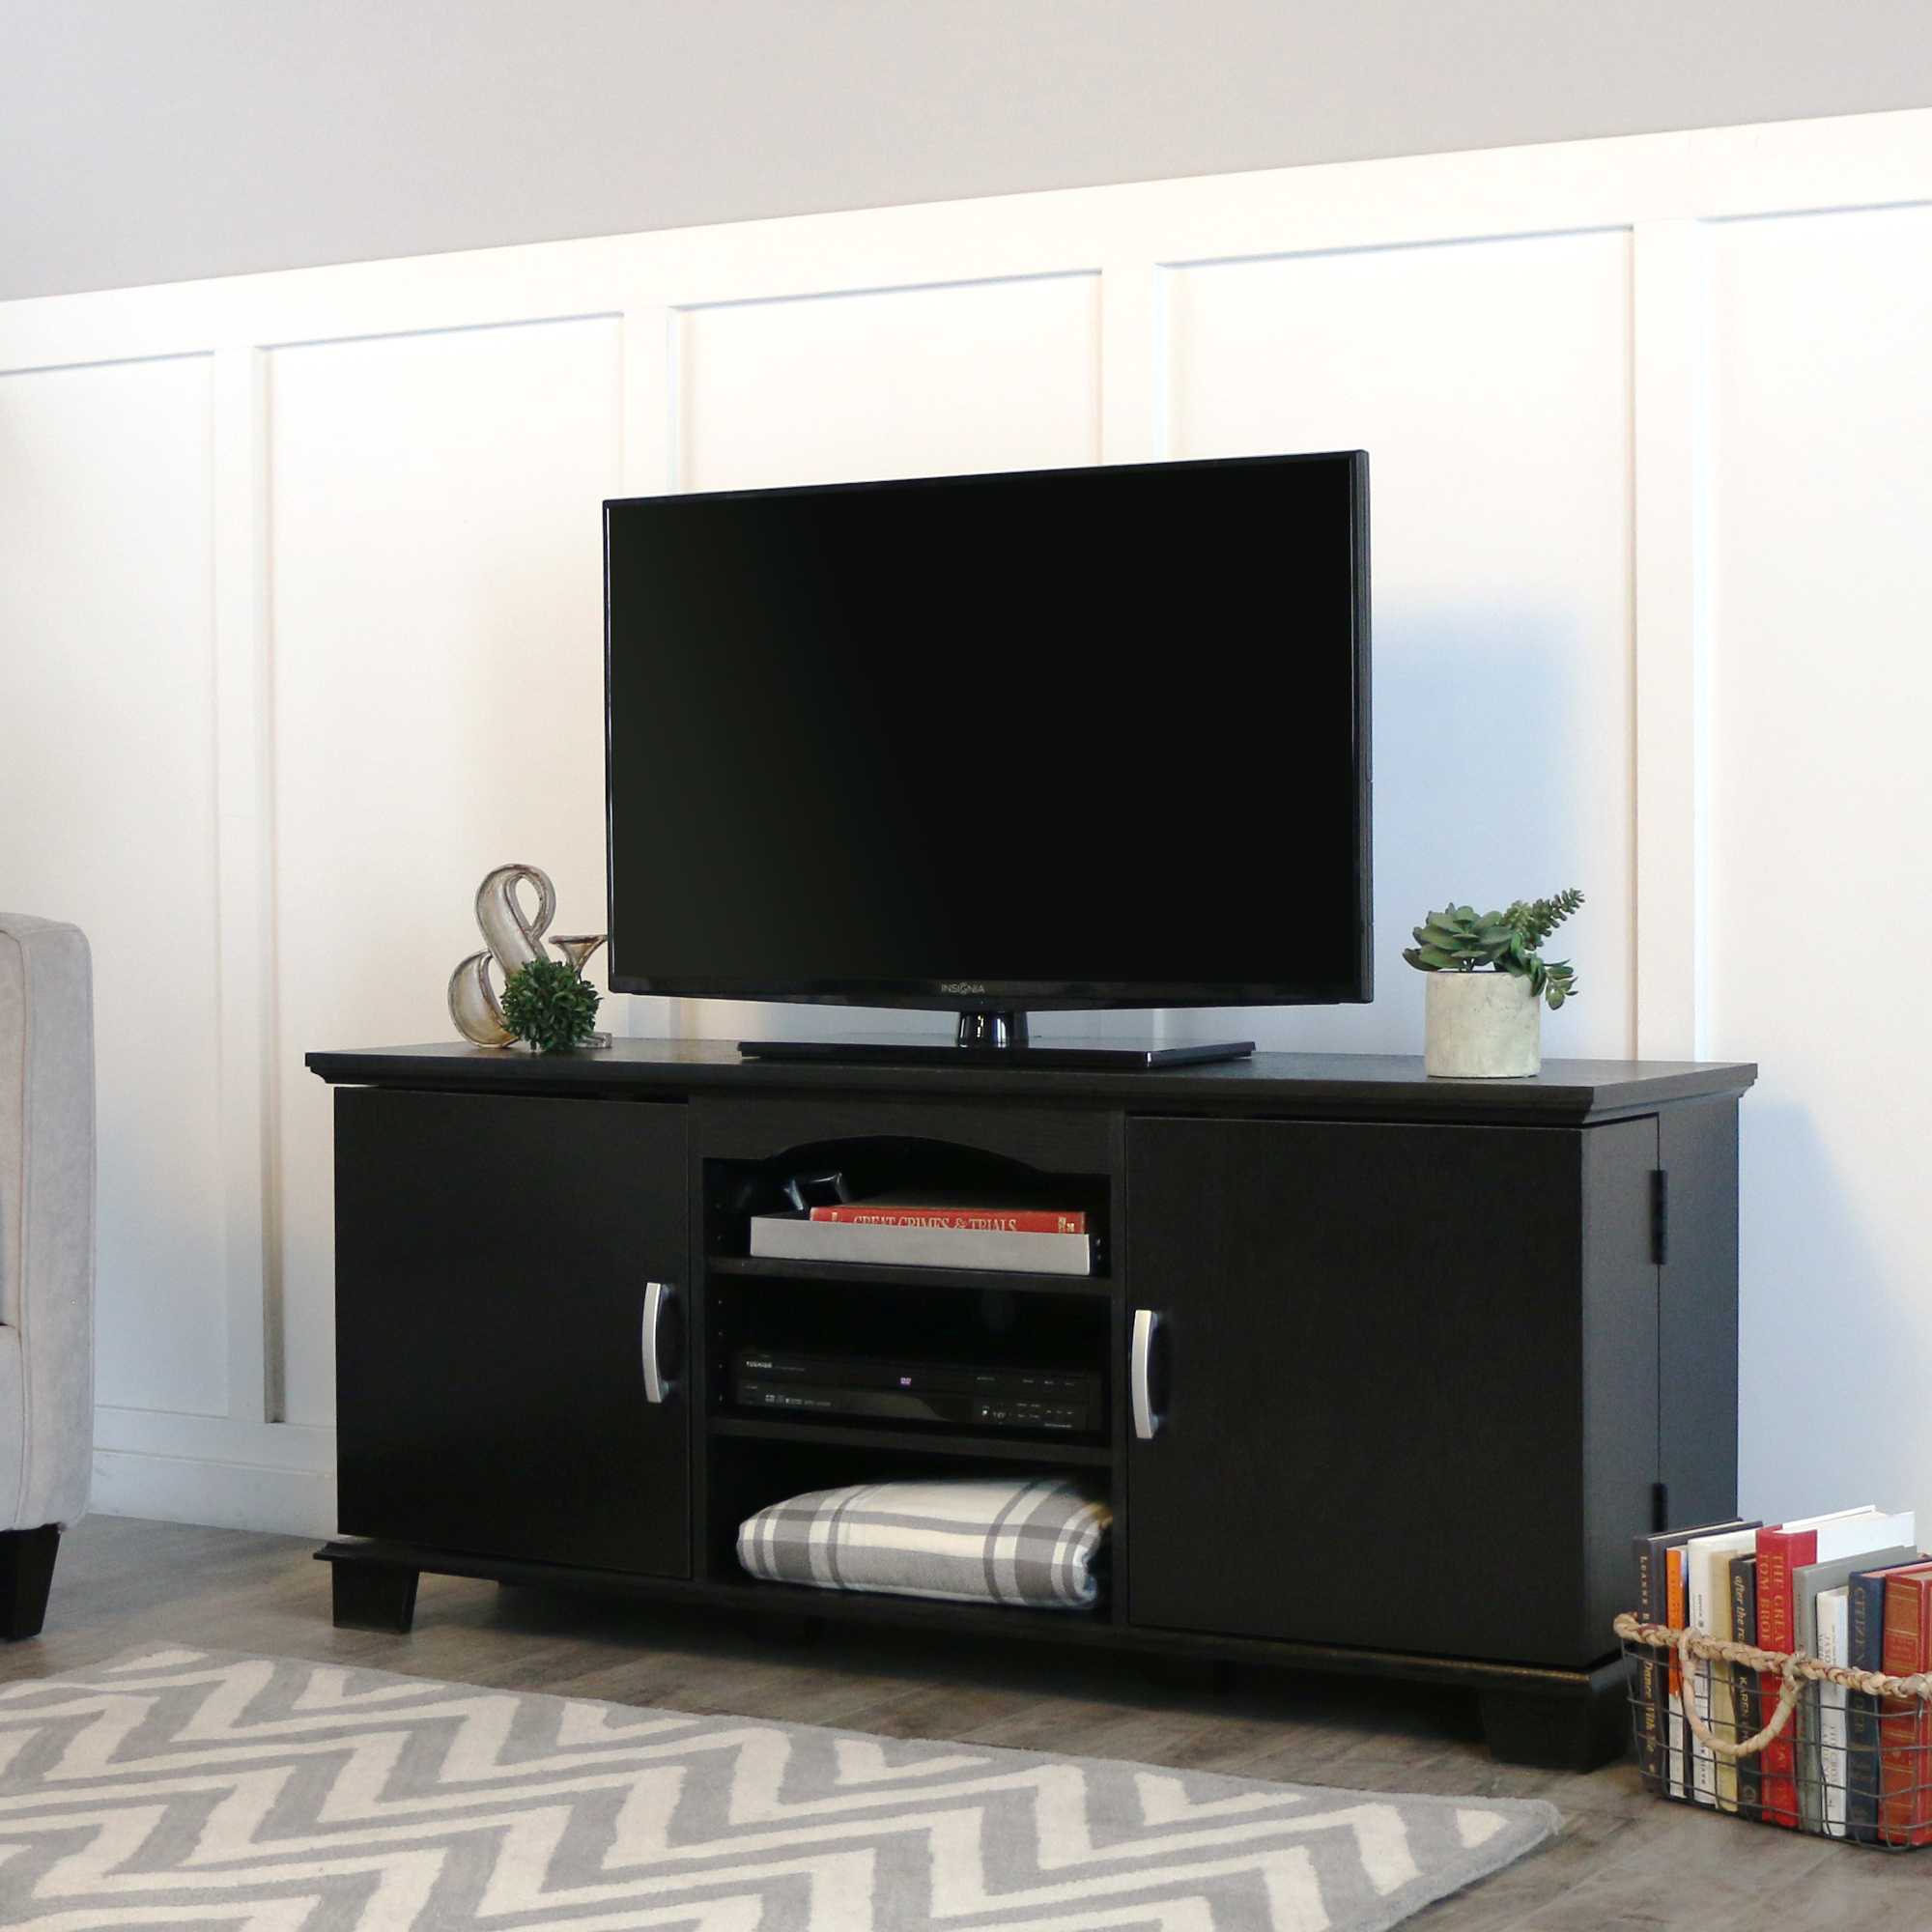 Walker Edison Black TV Stand for TVs up to 65'', Muliple Colors